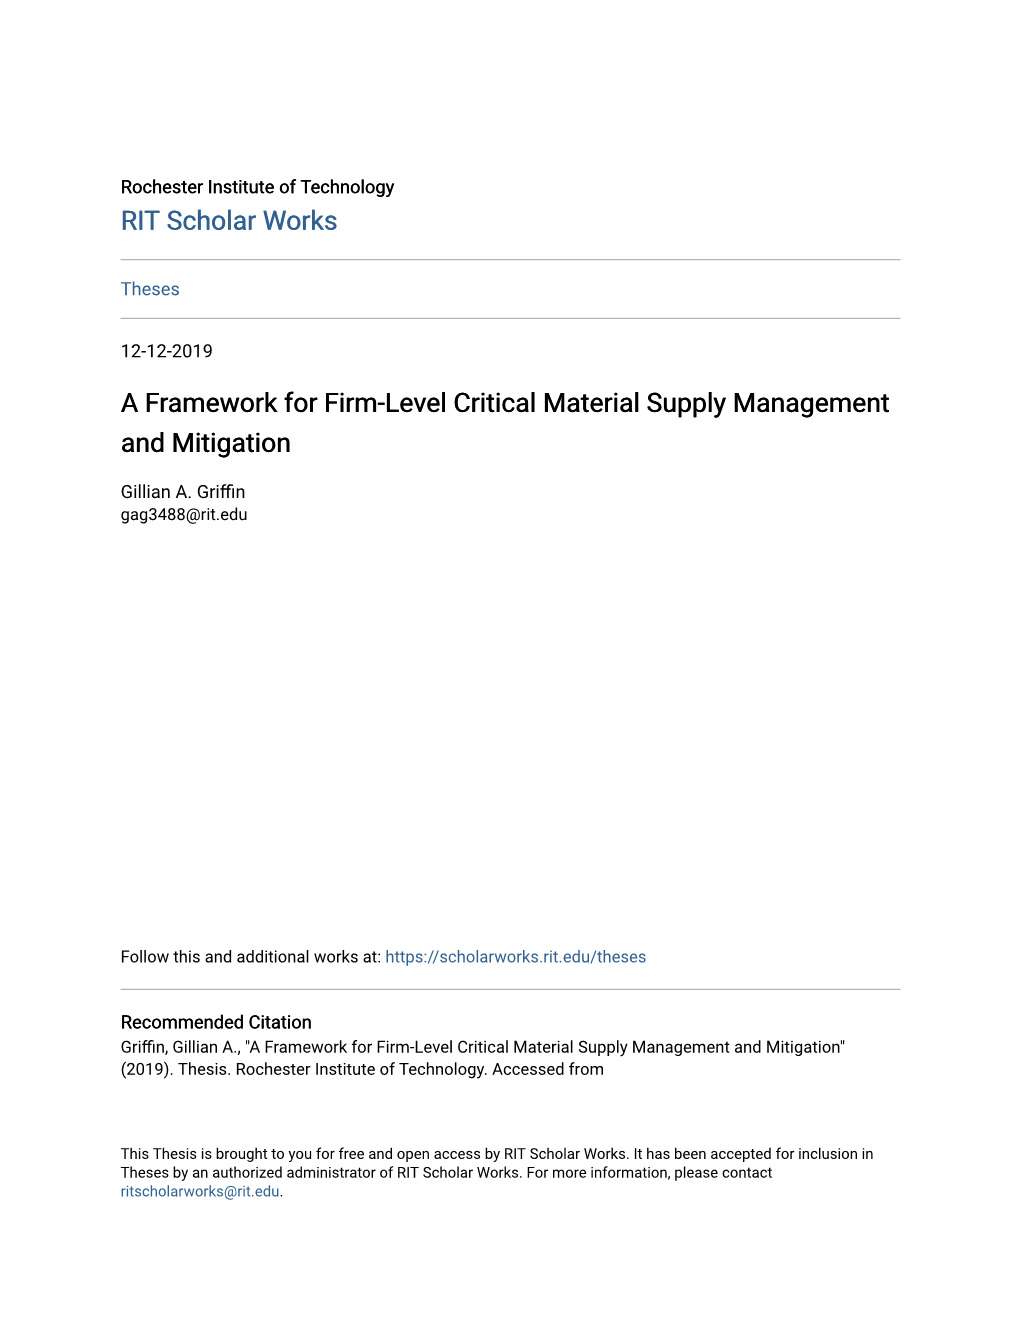 A Framework for Firm-Level Critical Material Supply Management and Mitigation